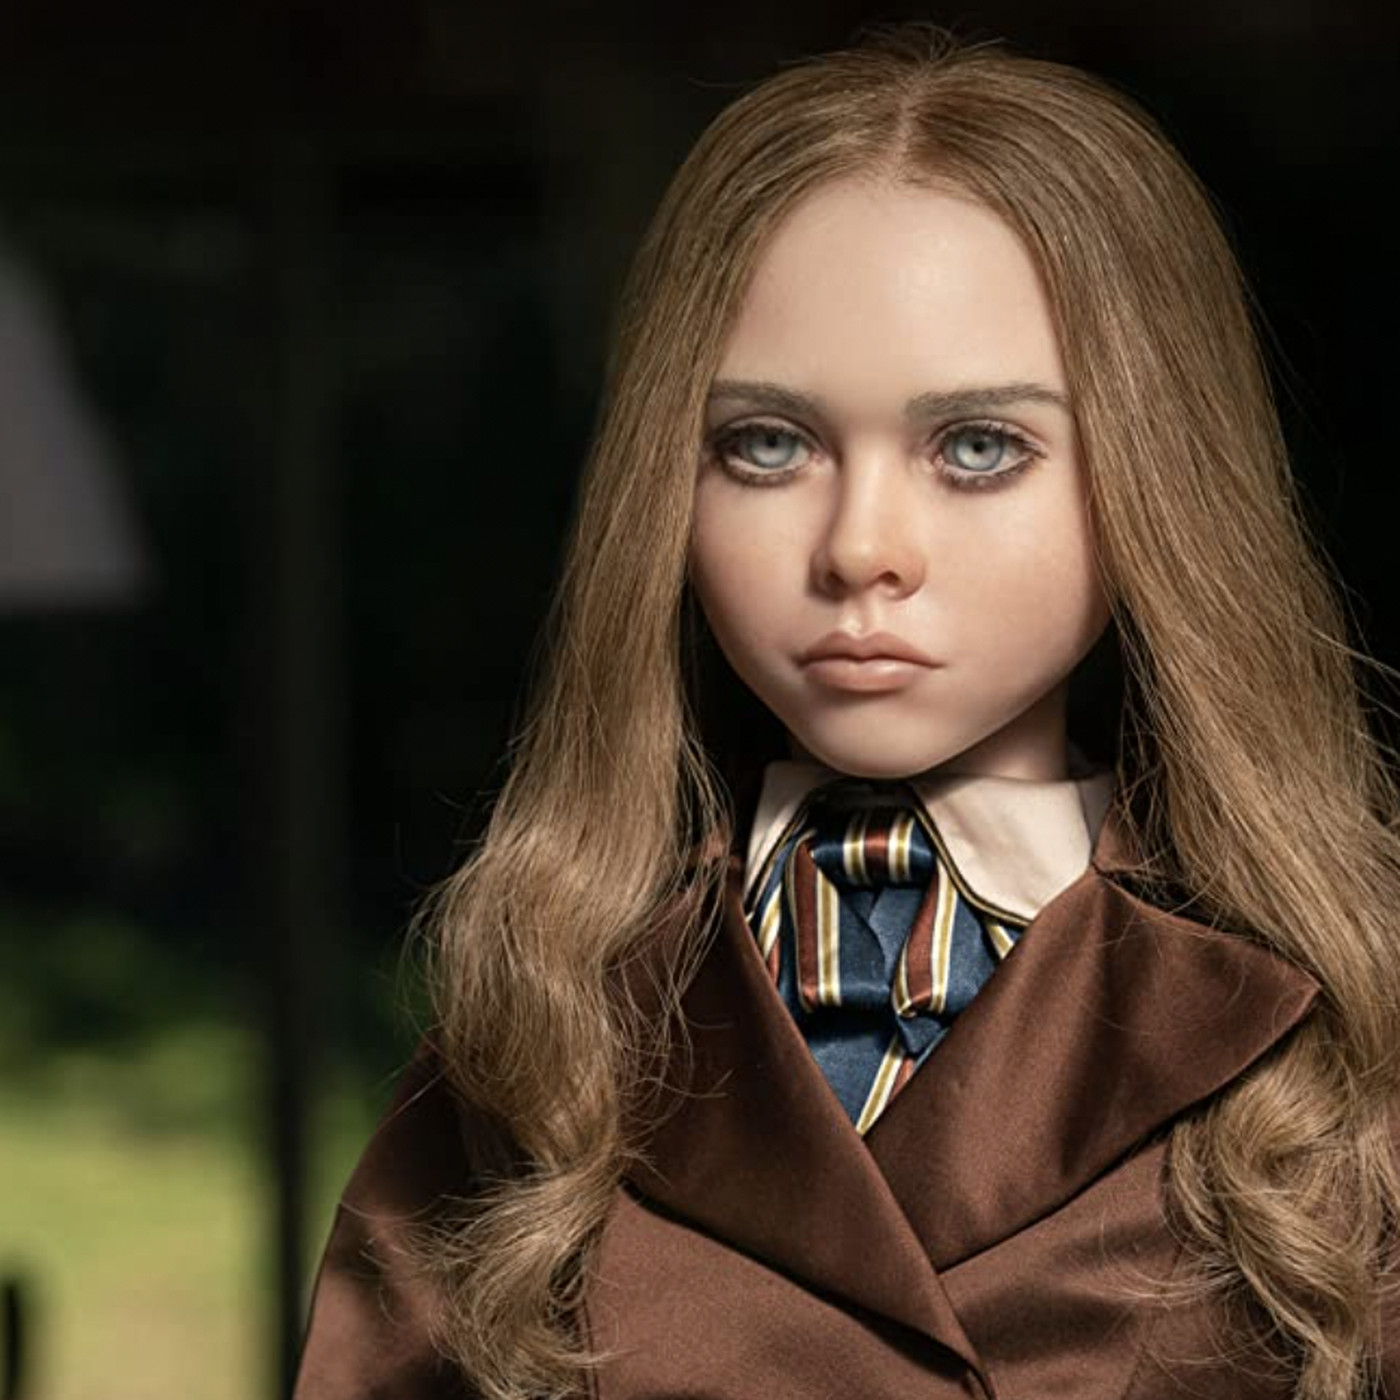 M3gan, the murder doll, is already a camp horror icon in the making - Vox